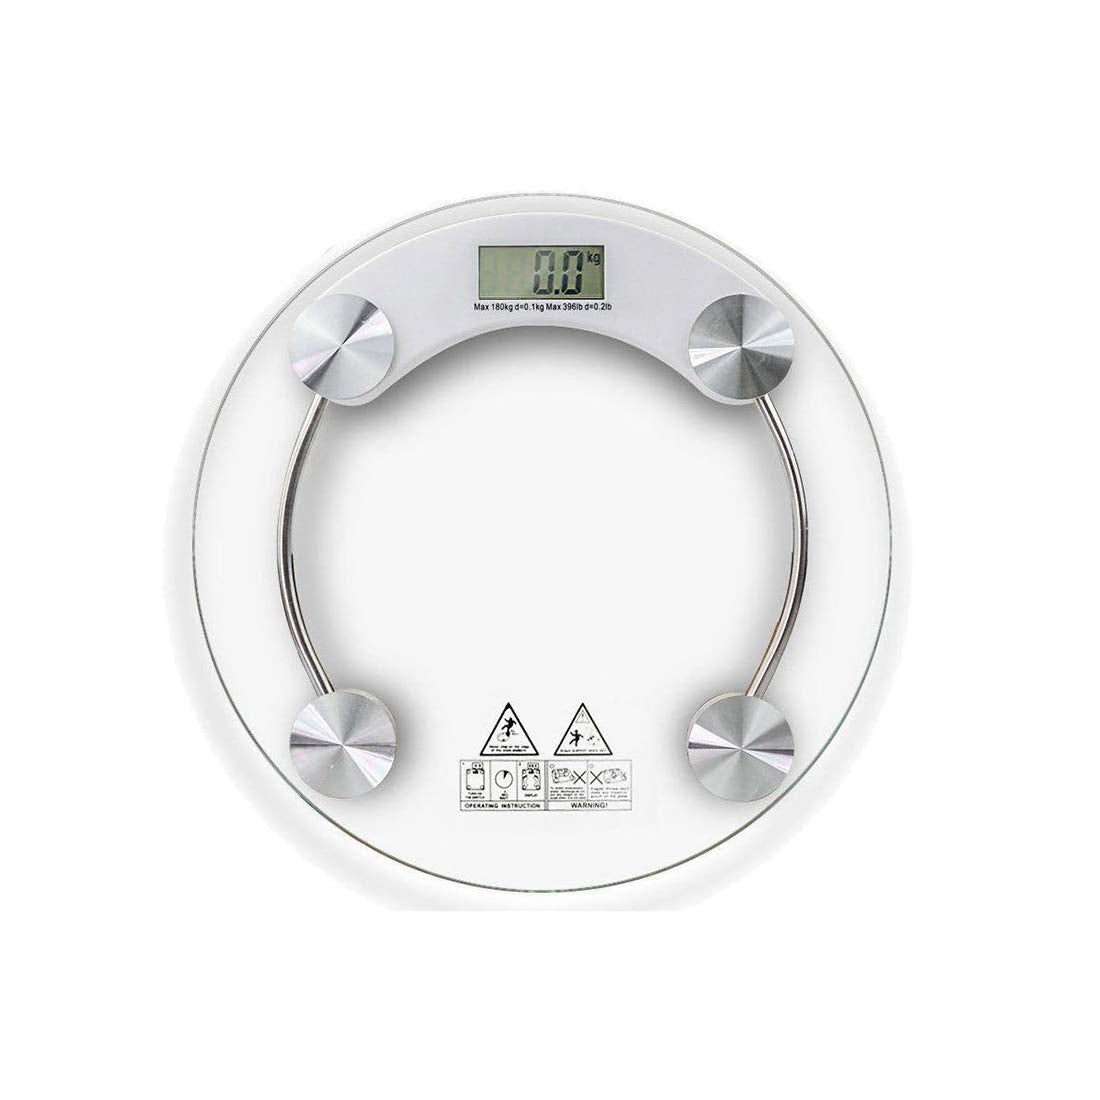 Dr Care Round Shape 8 MM Glass Digital Weighing Scale